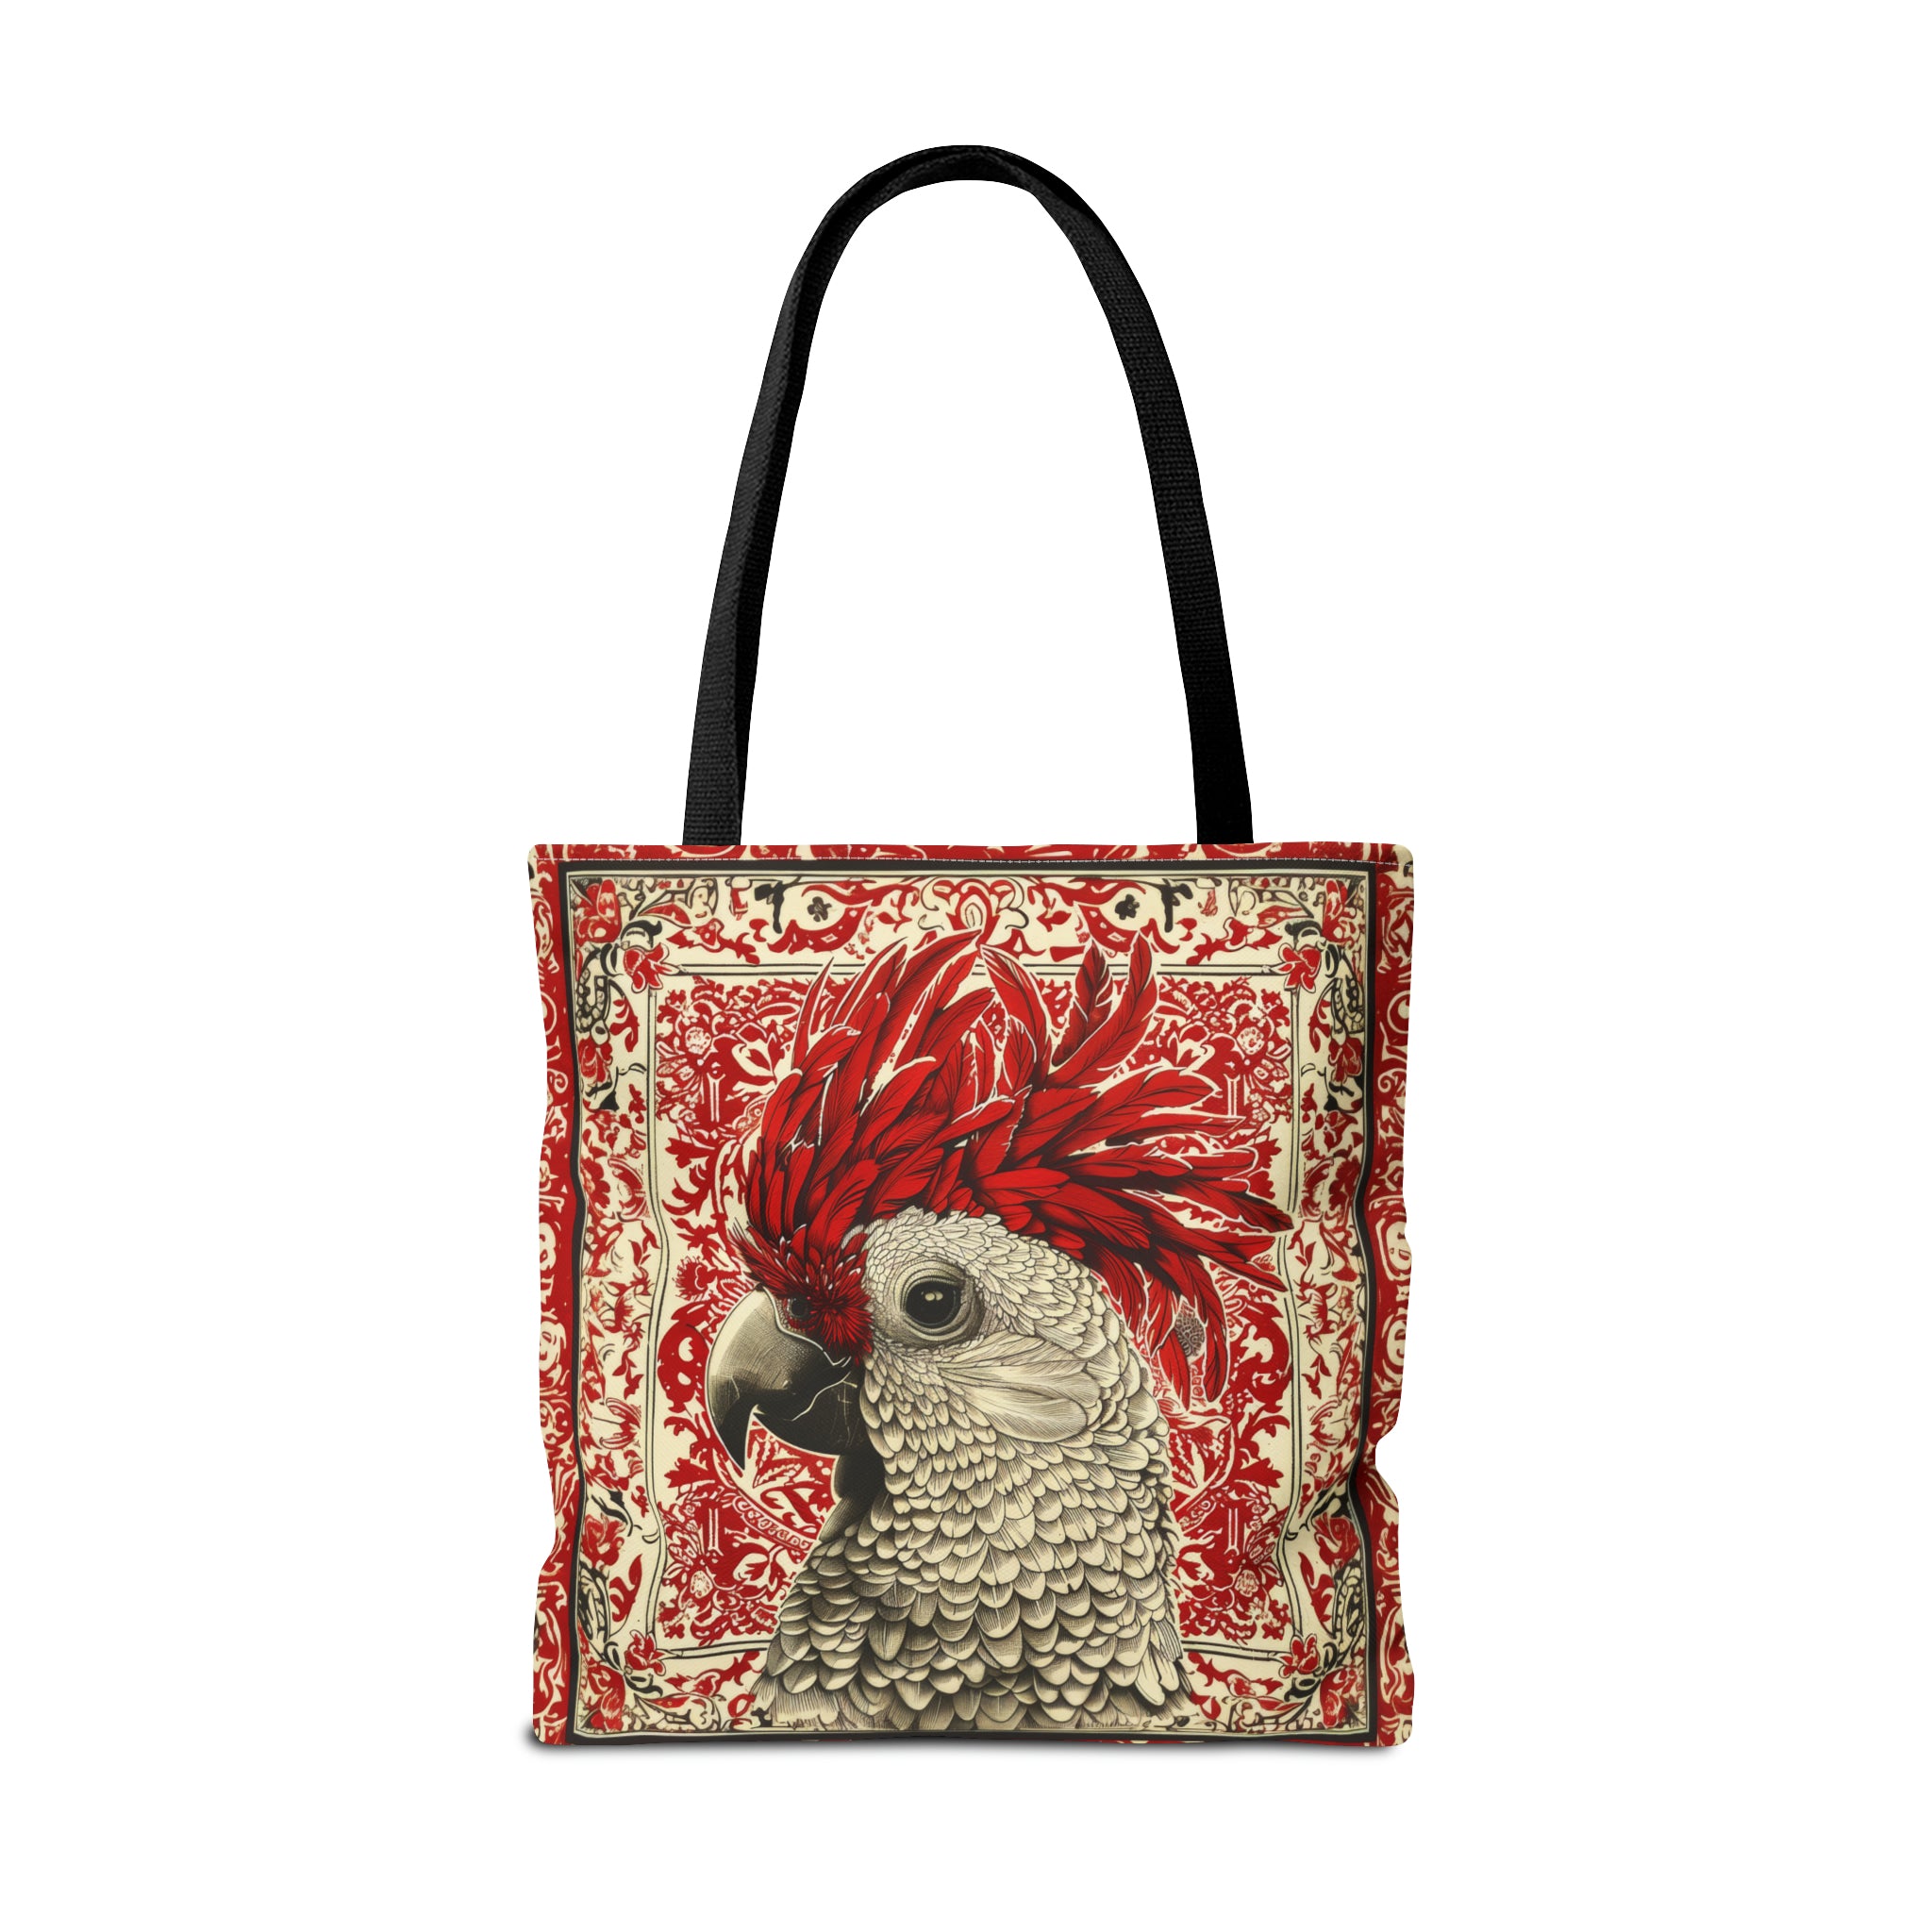 Canvas Tote Bag, vintage inspired exotic bird design in red, vibrant artistic accessory, whimsical all over print bag, three sizes